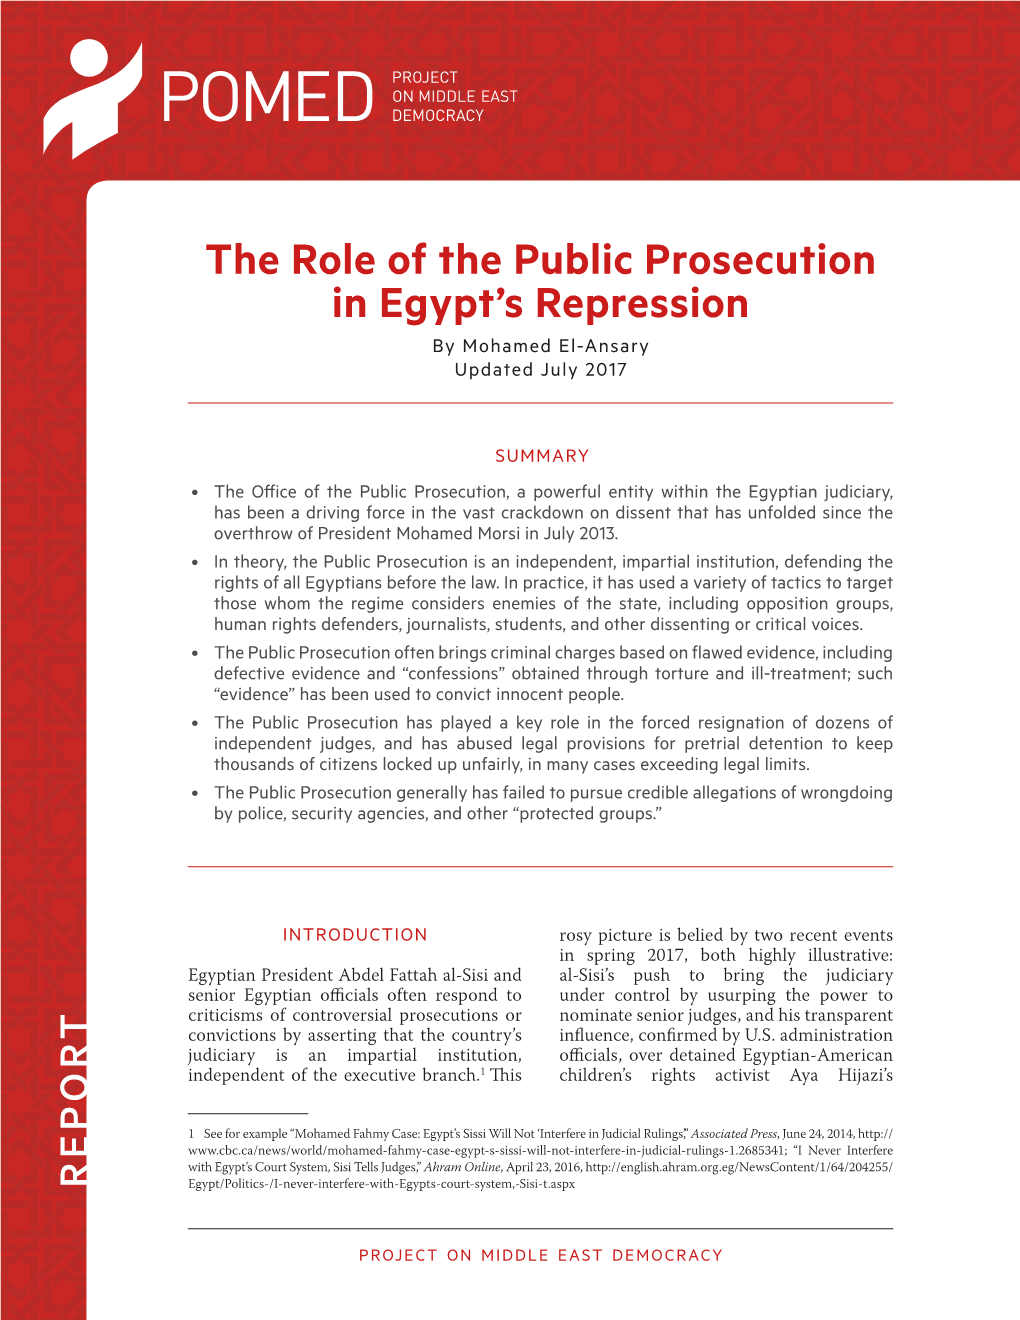 The Role of the Public Prosecution in Egypt's Repression